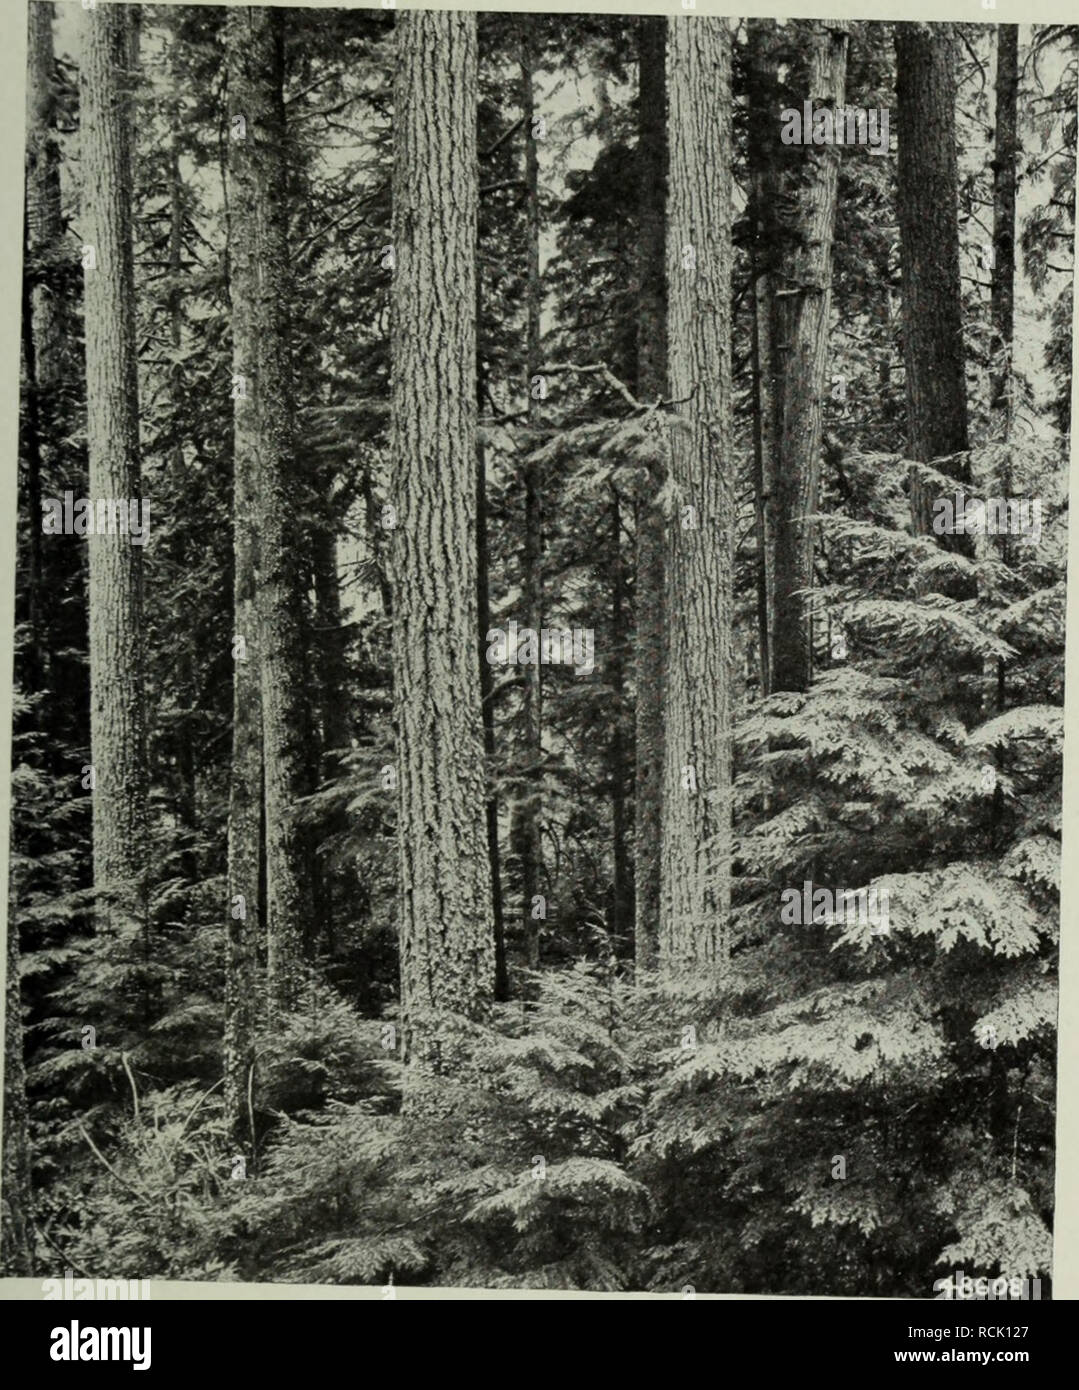 . Elements of forestry. Forests and forestry. PACIFIC COAST FOREST 341 3. The largest stands in the world are found here. The redwood occurs up to 35 feet in diameter and 350 feet in. Fig. 63. — A Heavy Stand of Douglas Fir in Western Washington. Trees are frequently found up to 12 feet in diameter and 250 feet in height. It is adapted to management by the clear-cutting system. height; the Douglas fir is found up to 12 feet in diameter and 250 feet in height, and the sugar and yellow pines, cedars, spruces and others attain a large size. The average. Please note that these images are extracted Stock Photo